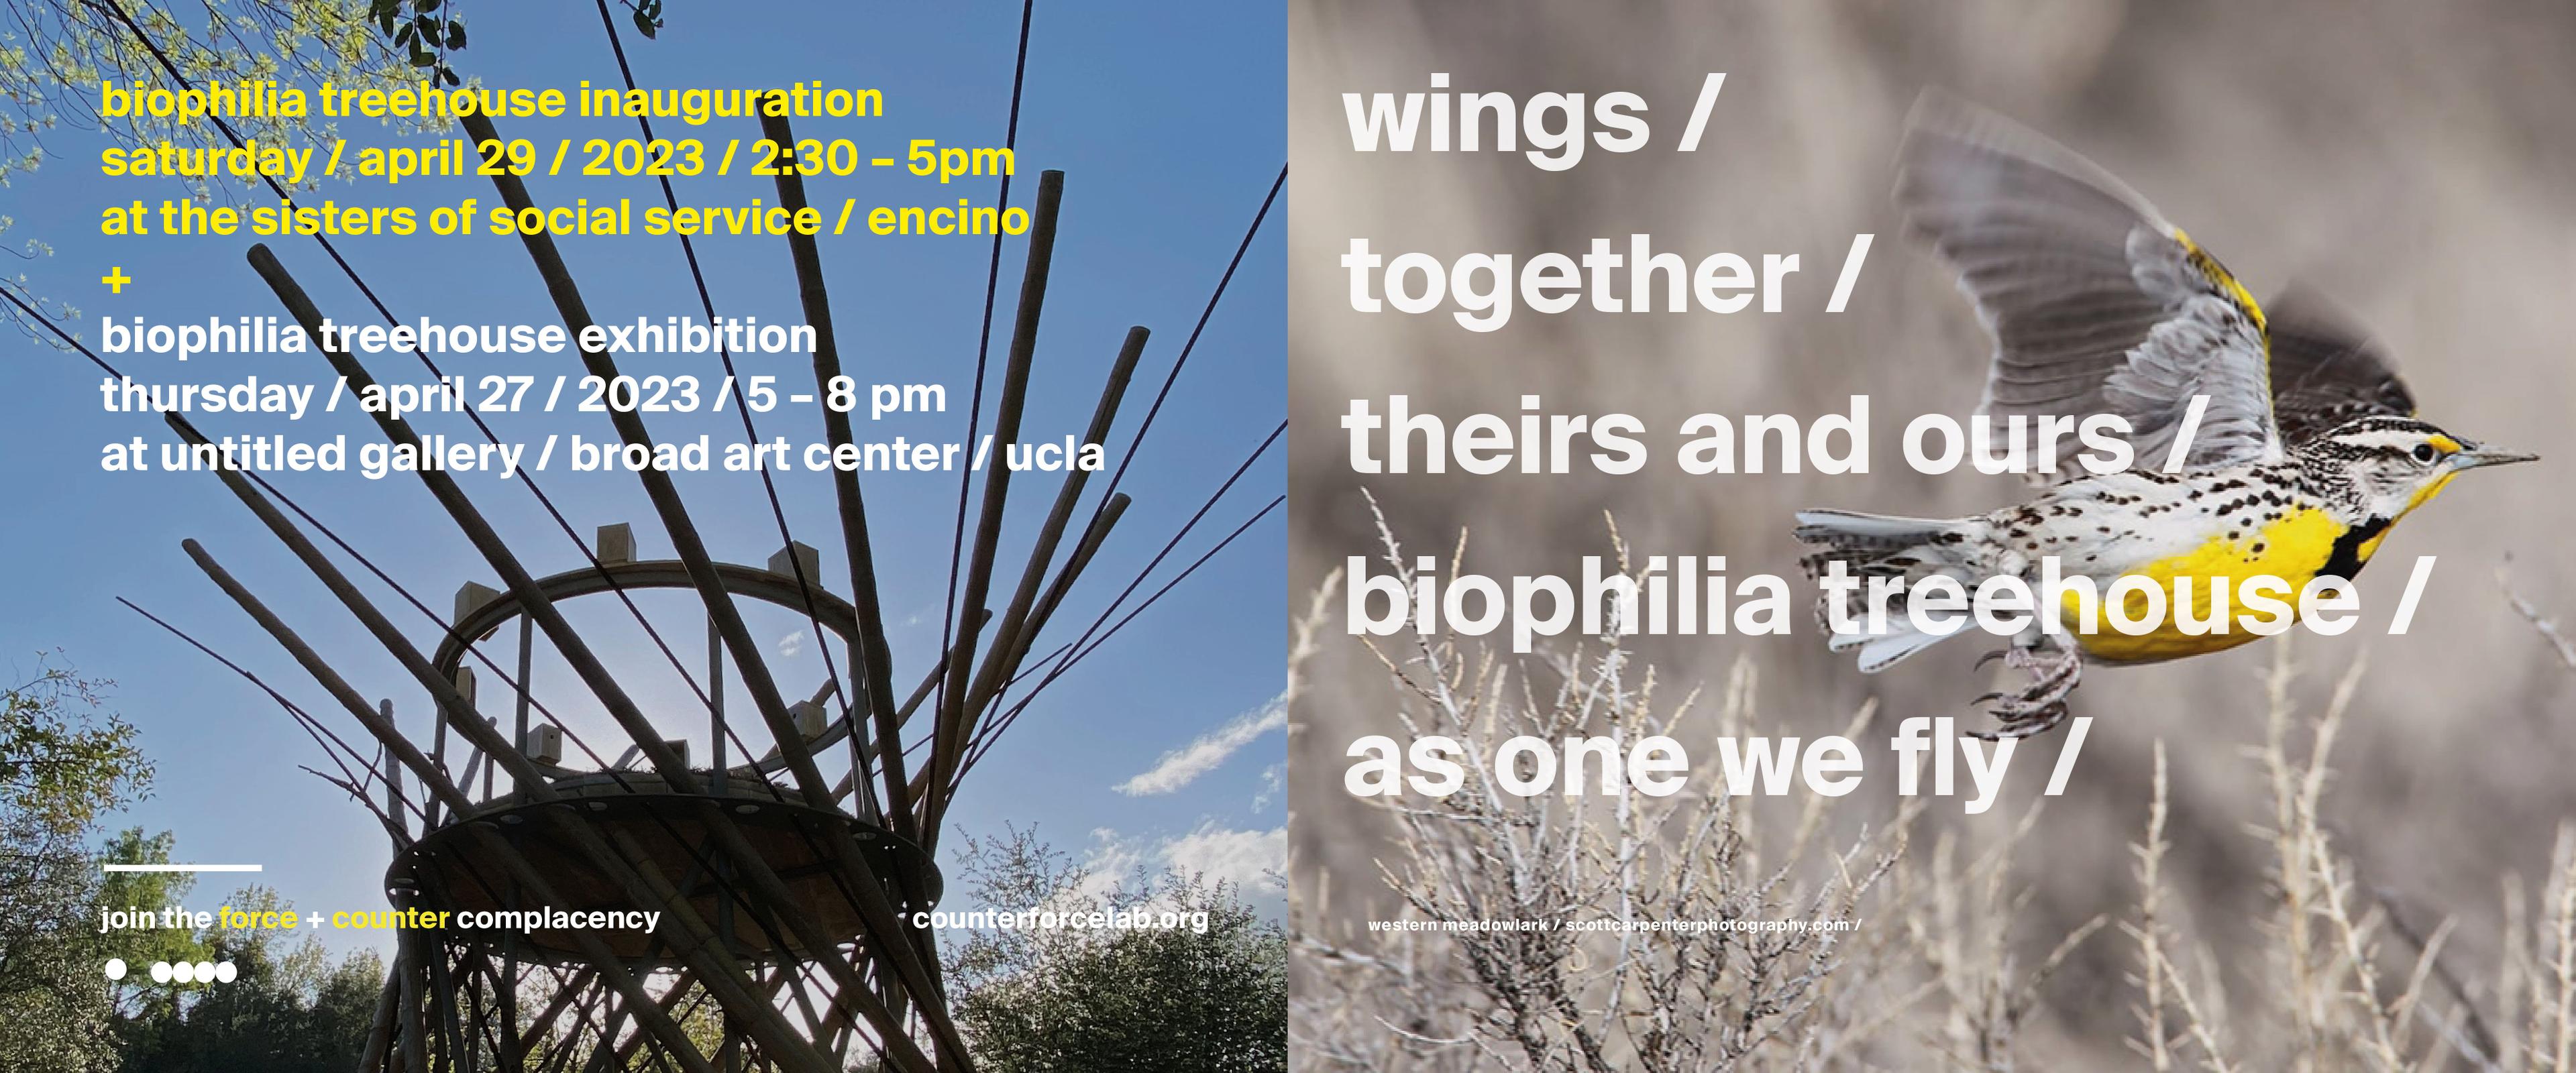 The image on the left is a middle shot of the Biophilia Treehouse surrounded by trees with blue sky. The image on the right is of a beautiful Western Meadowlark bird in flight. 